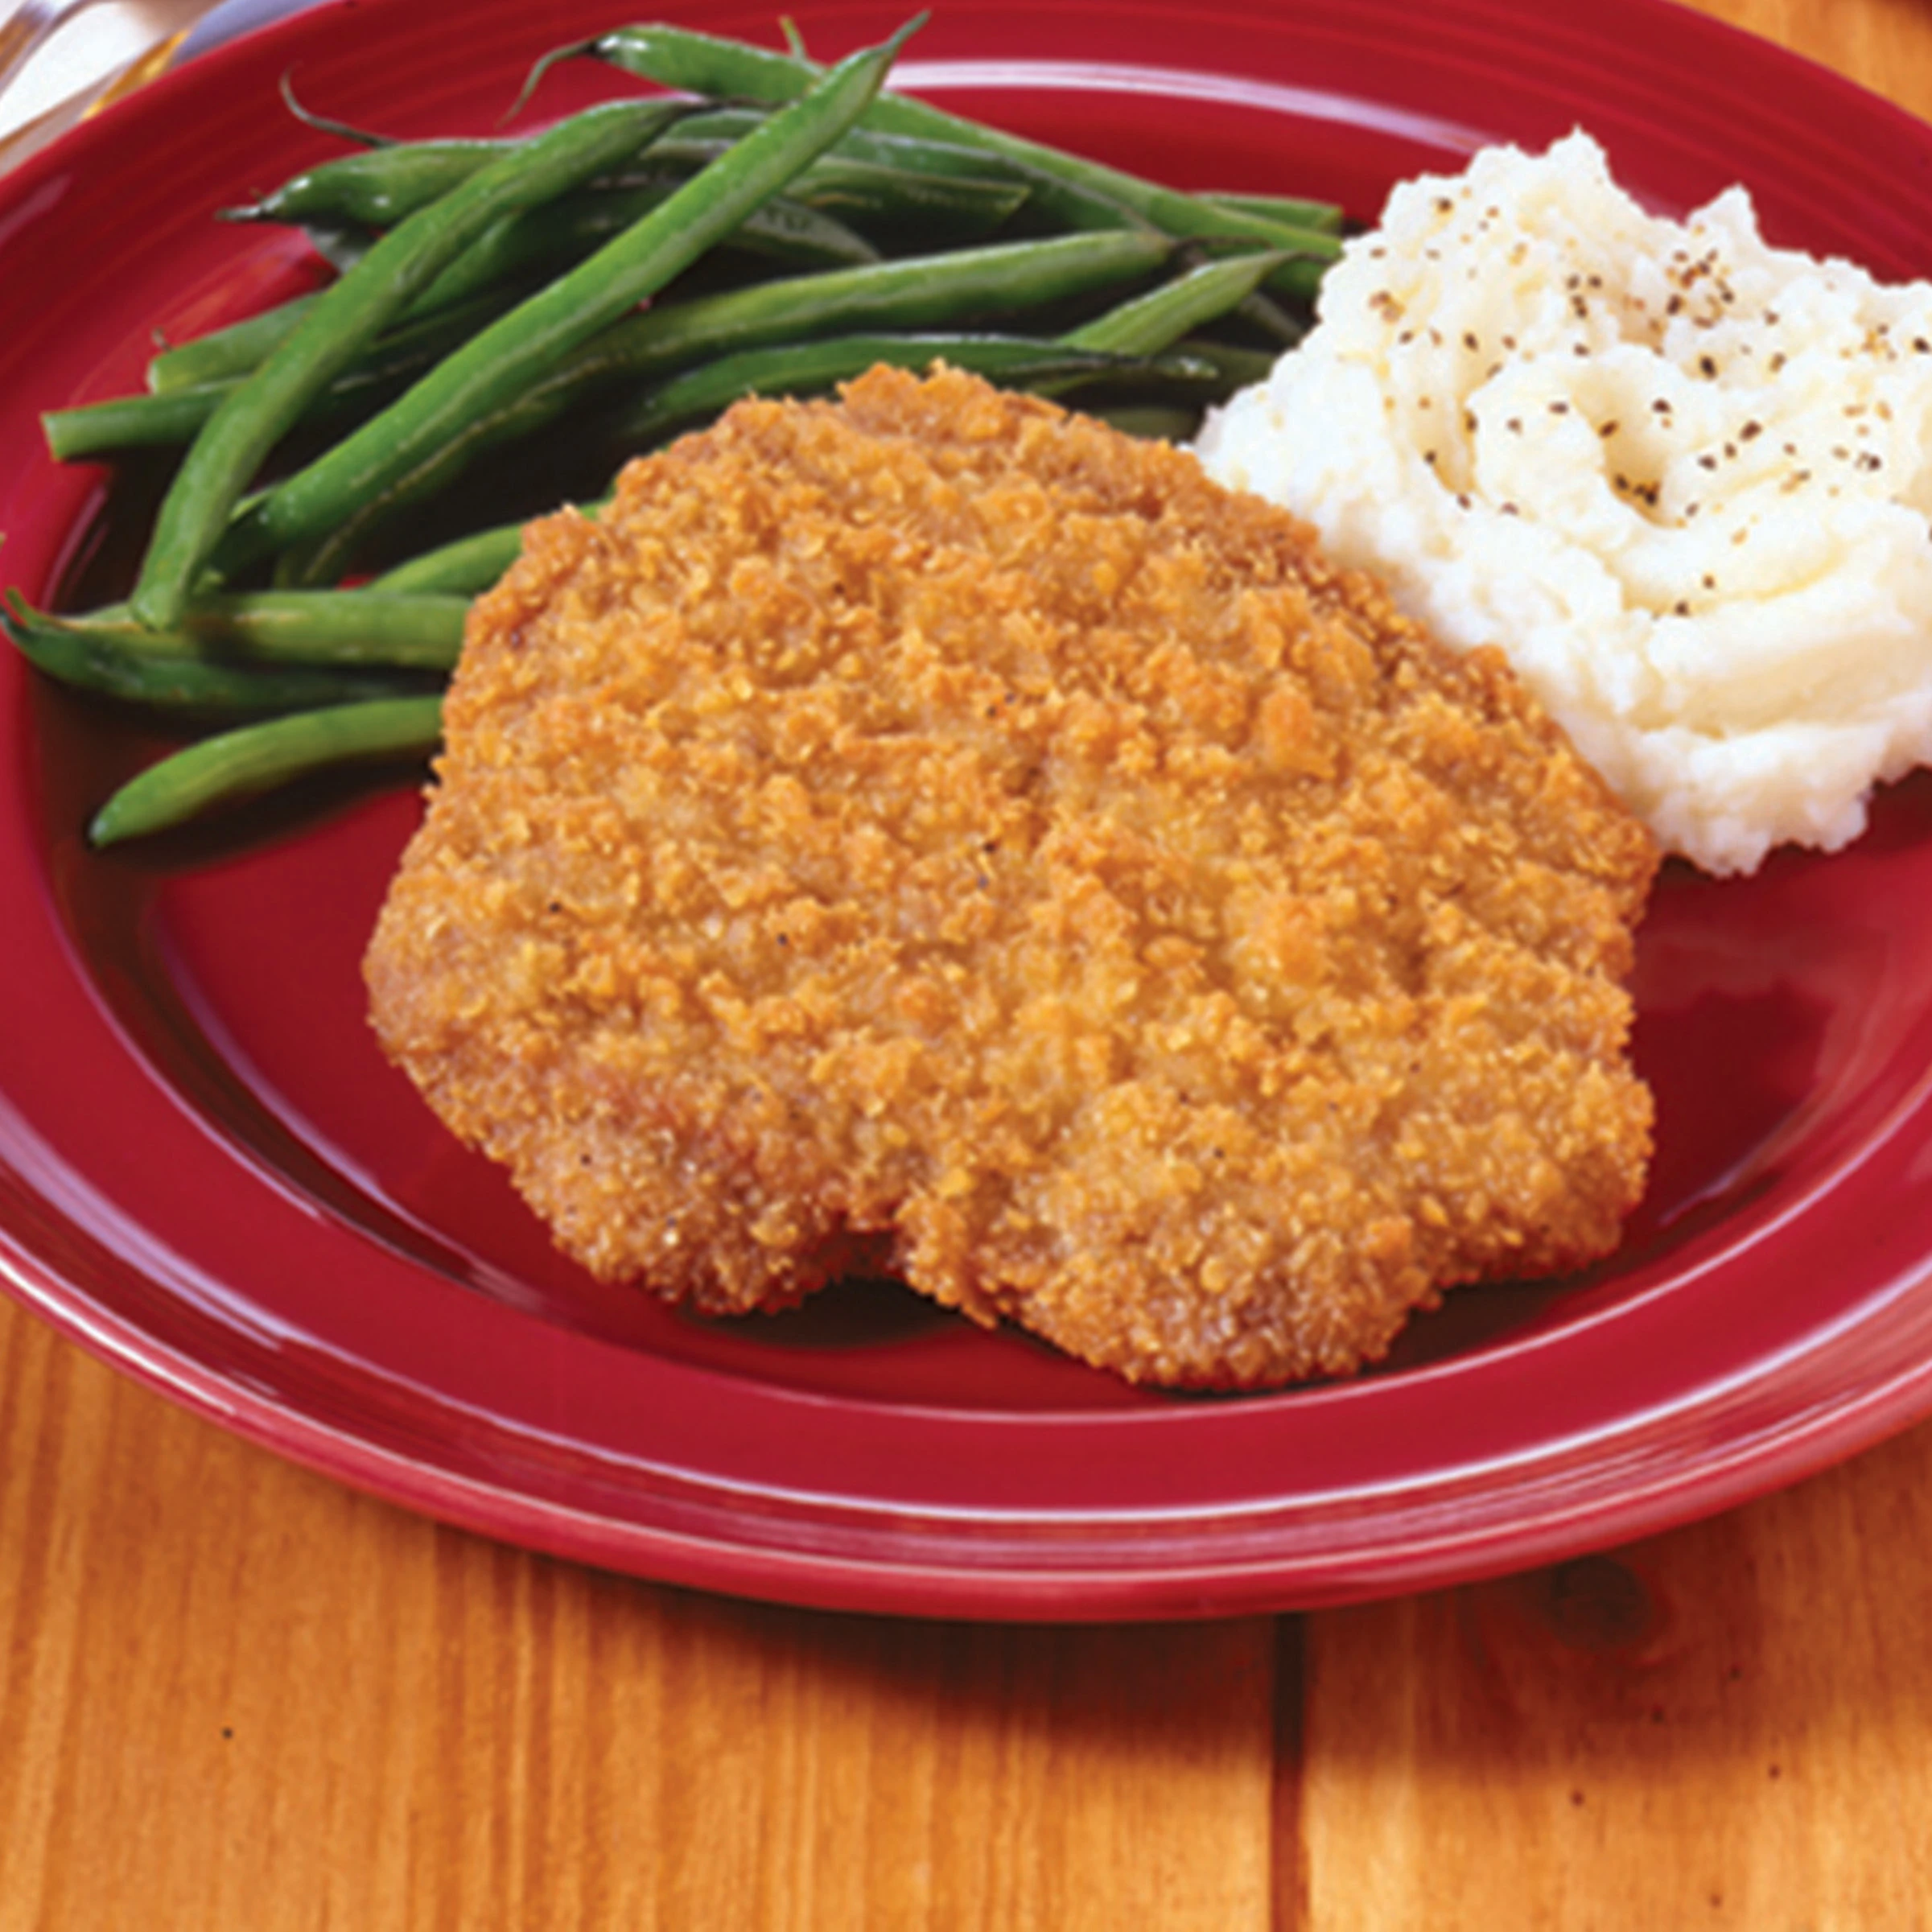 AdvancePierre™ Gold Label Crispy Steak™ Fully Cooked Breaded Country Fried Beef Steak Fritters, 4 oz, Approx. 40 Pieces, 10 Lbshttp://images.salsify.com/image/upload/s--7HvqnwT1--/qv8h6wojz7rbwh2fb4yj.webp